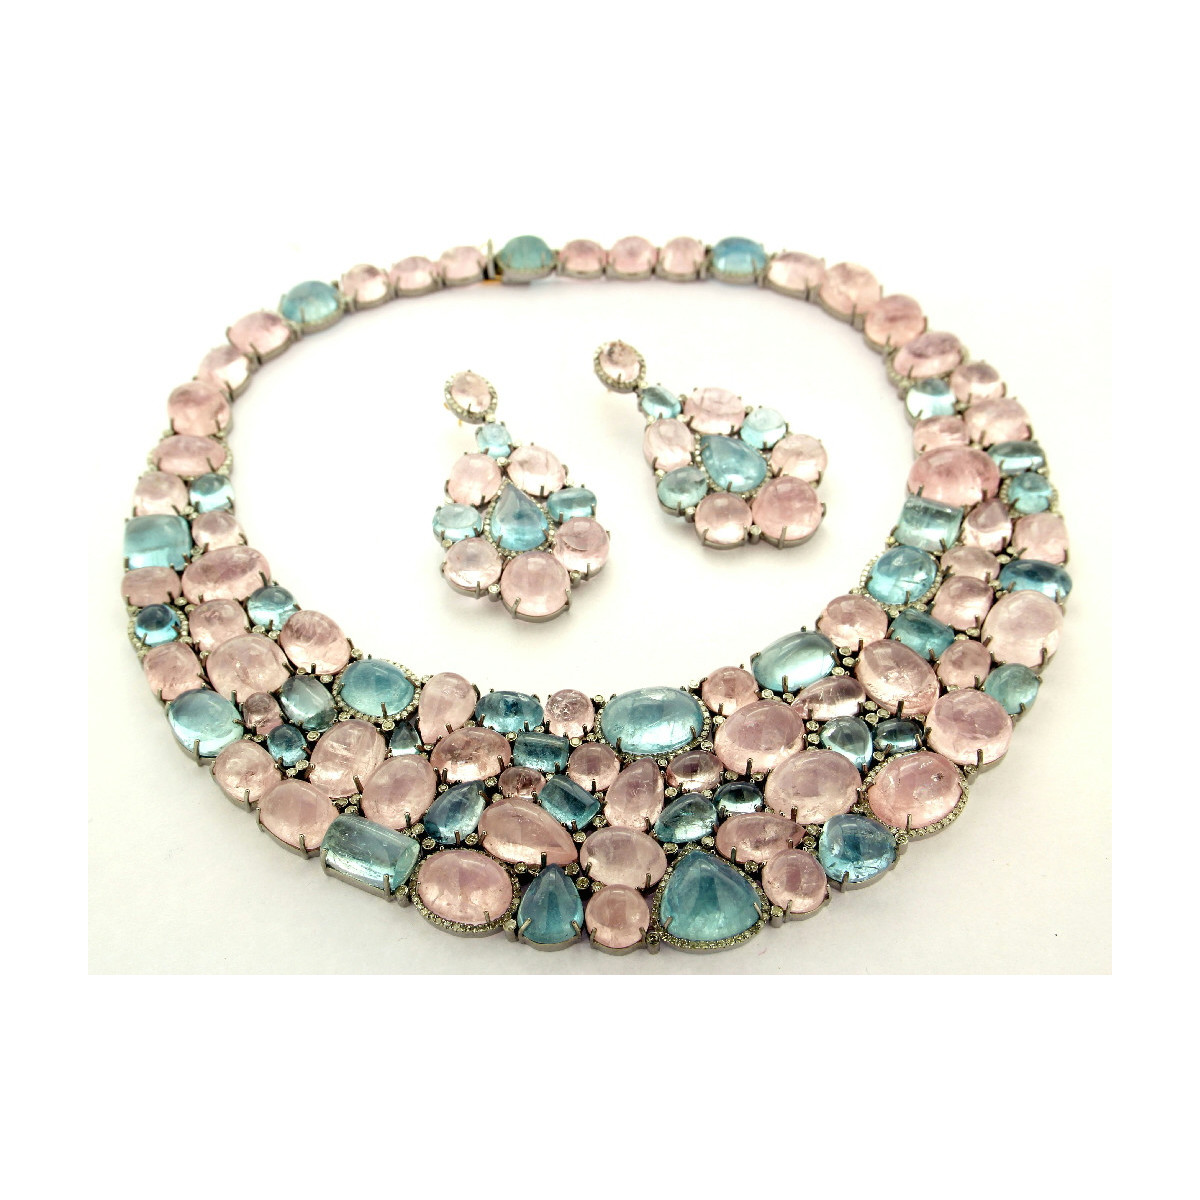 Necklace and earrings aquamarine and morganite